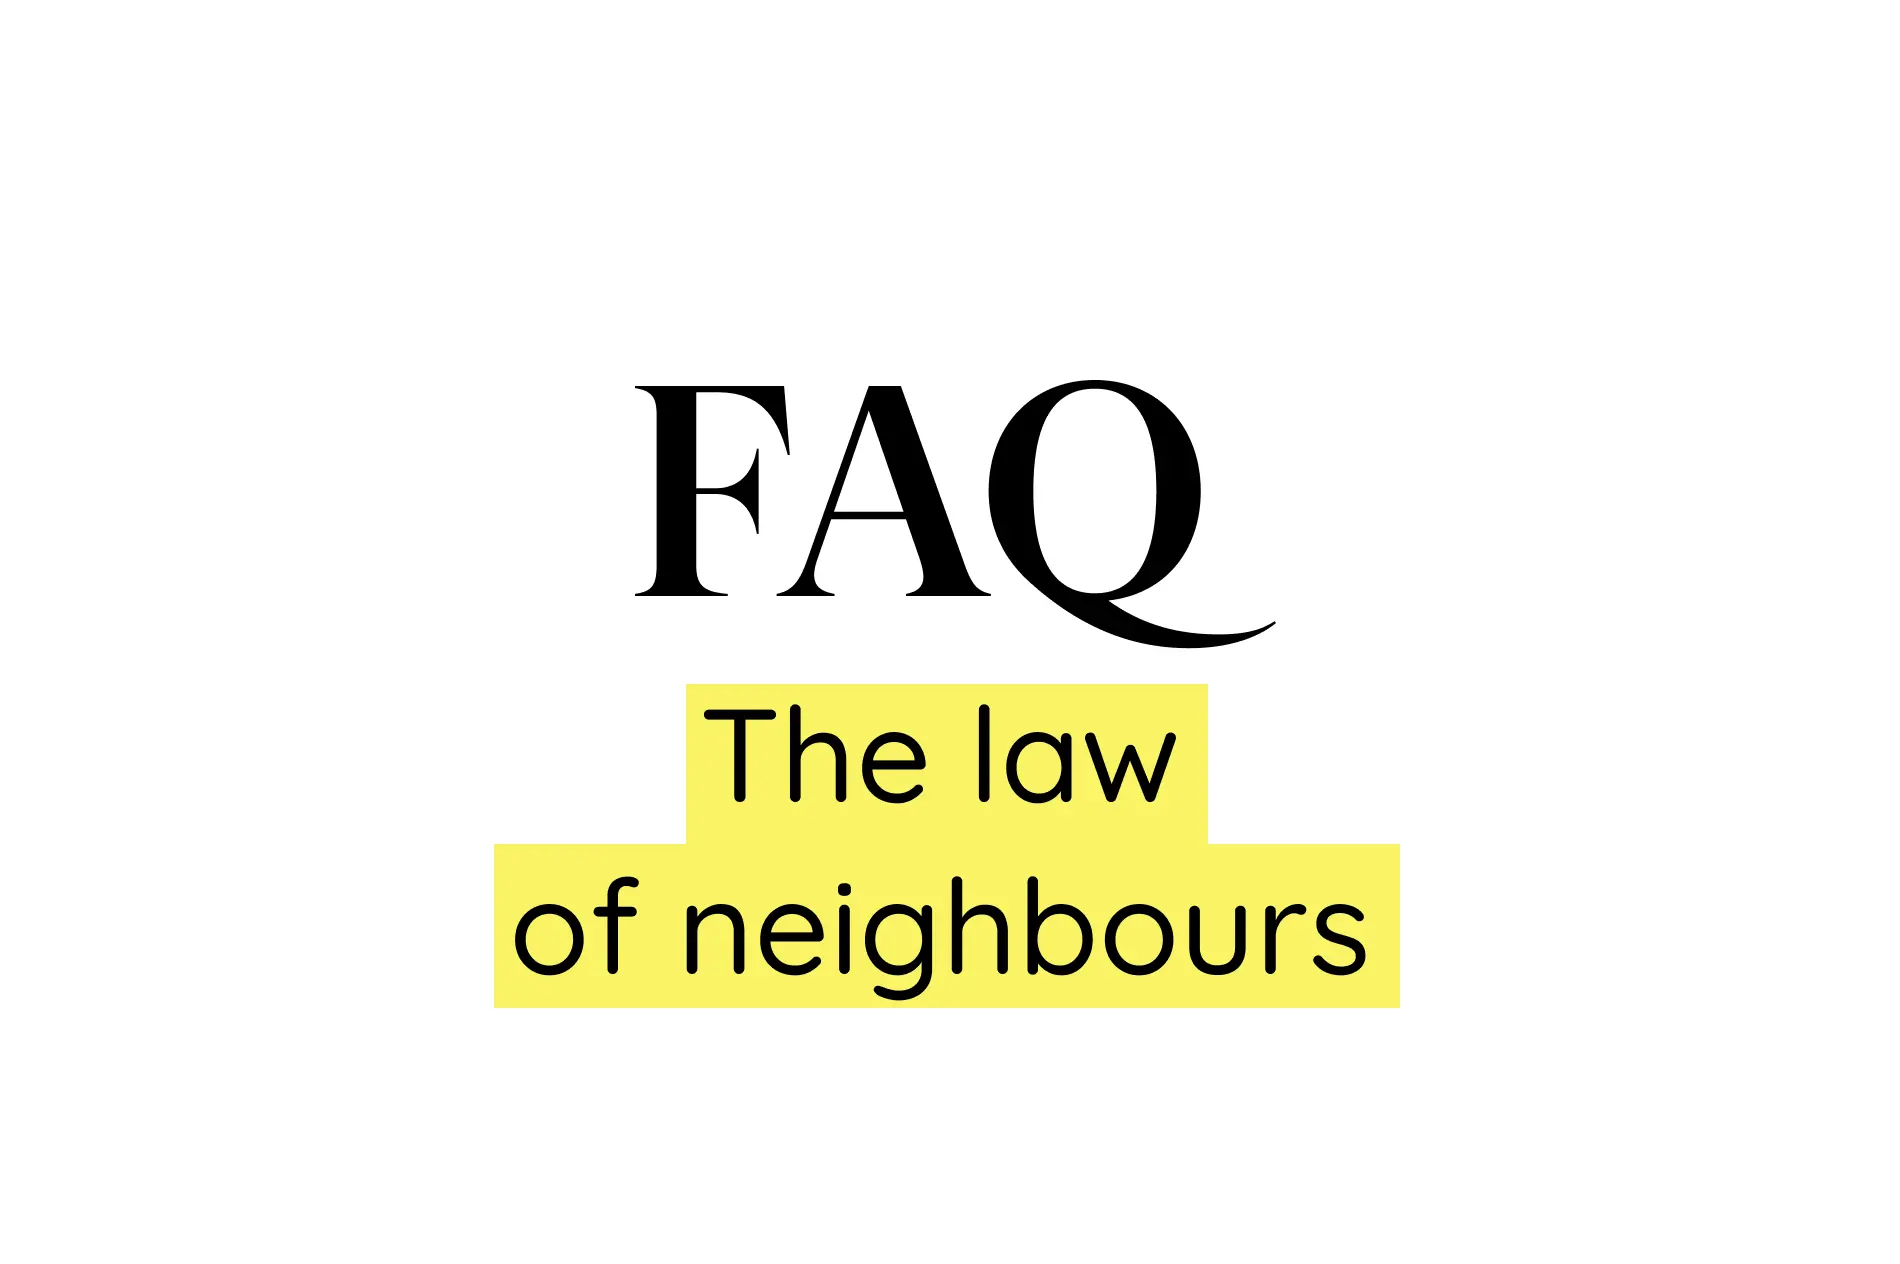 When a garden fence fuels controversy: Our FAQs on the law of neighbours